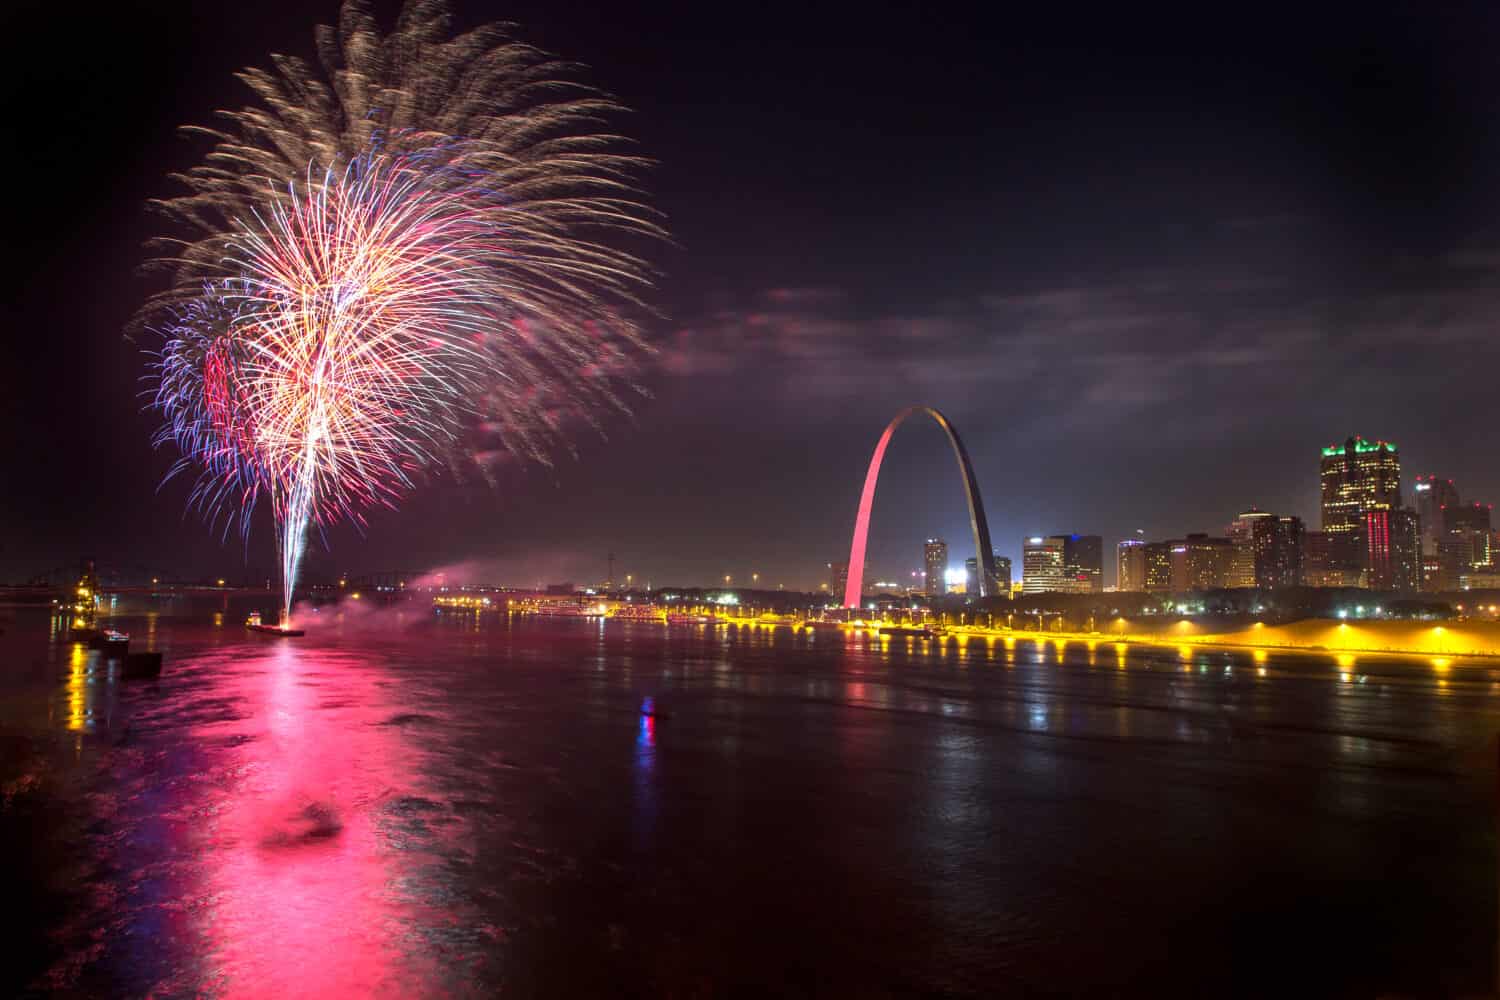 colorful fireworks explode in the night sky over the mississippi river and gateway arch in st louis during the fourth of july celebration